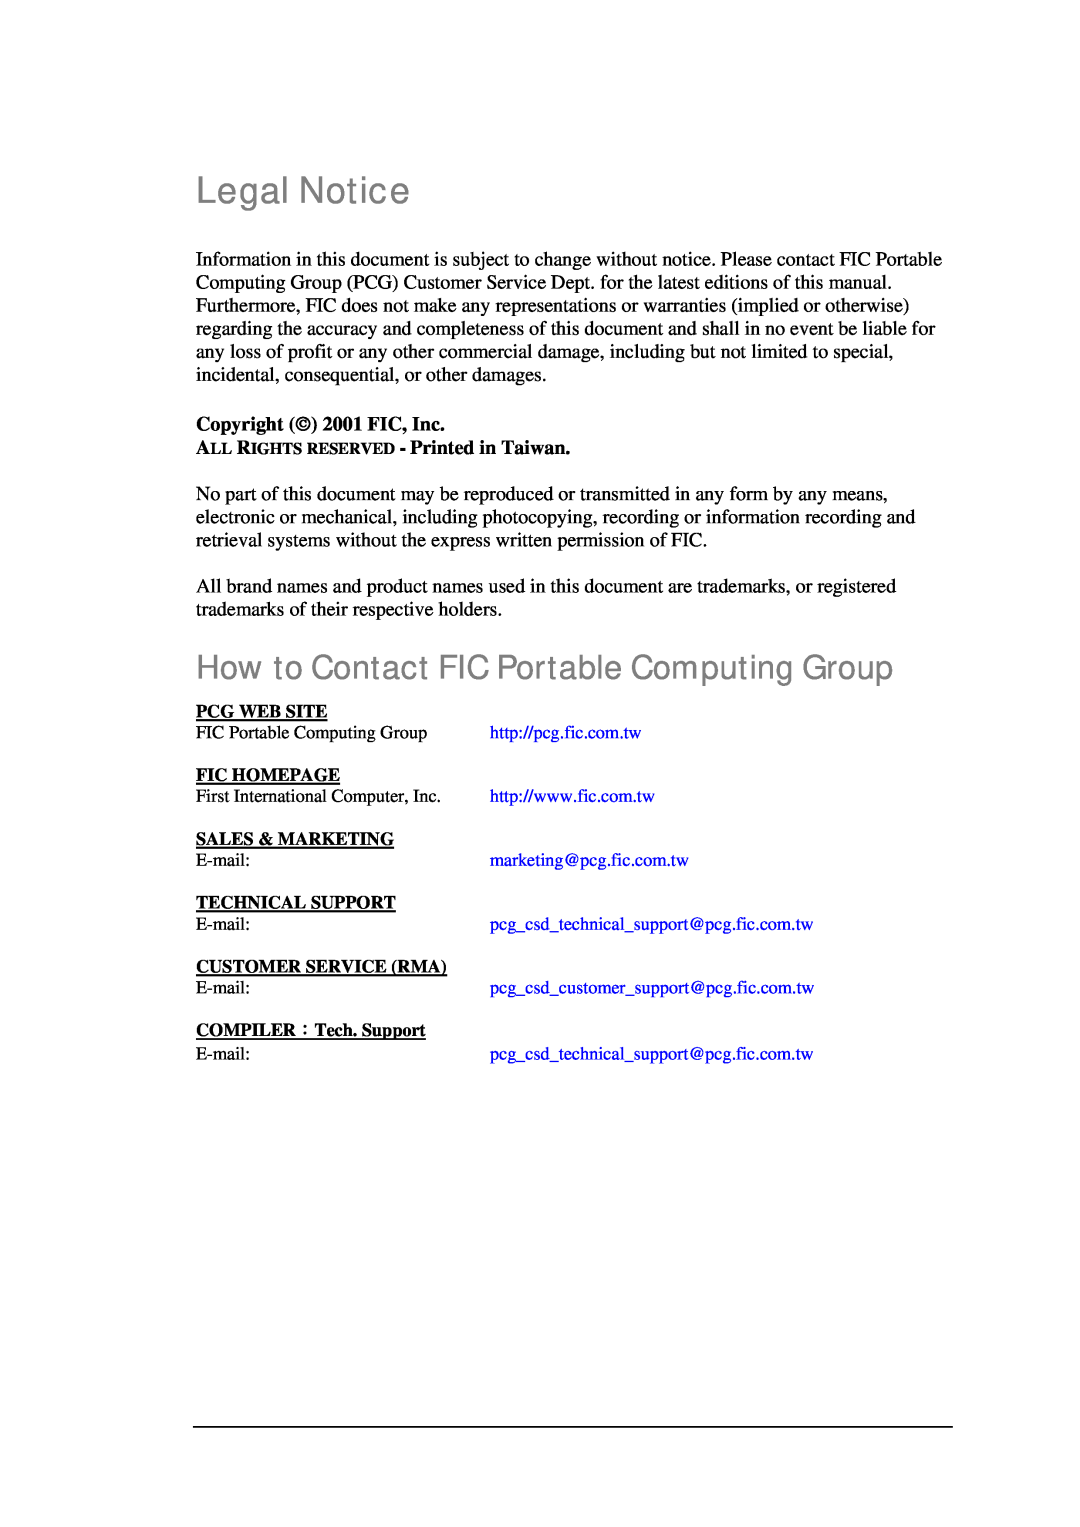 FIC A360 service manual Legal Notice, How to Contact FIC Portable Computing Group 